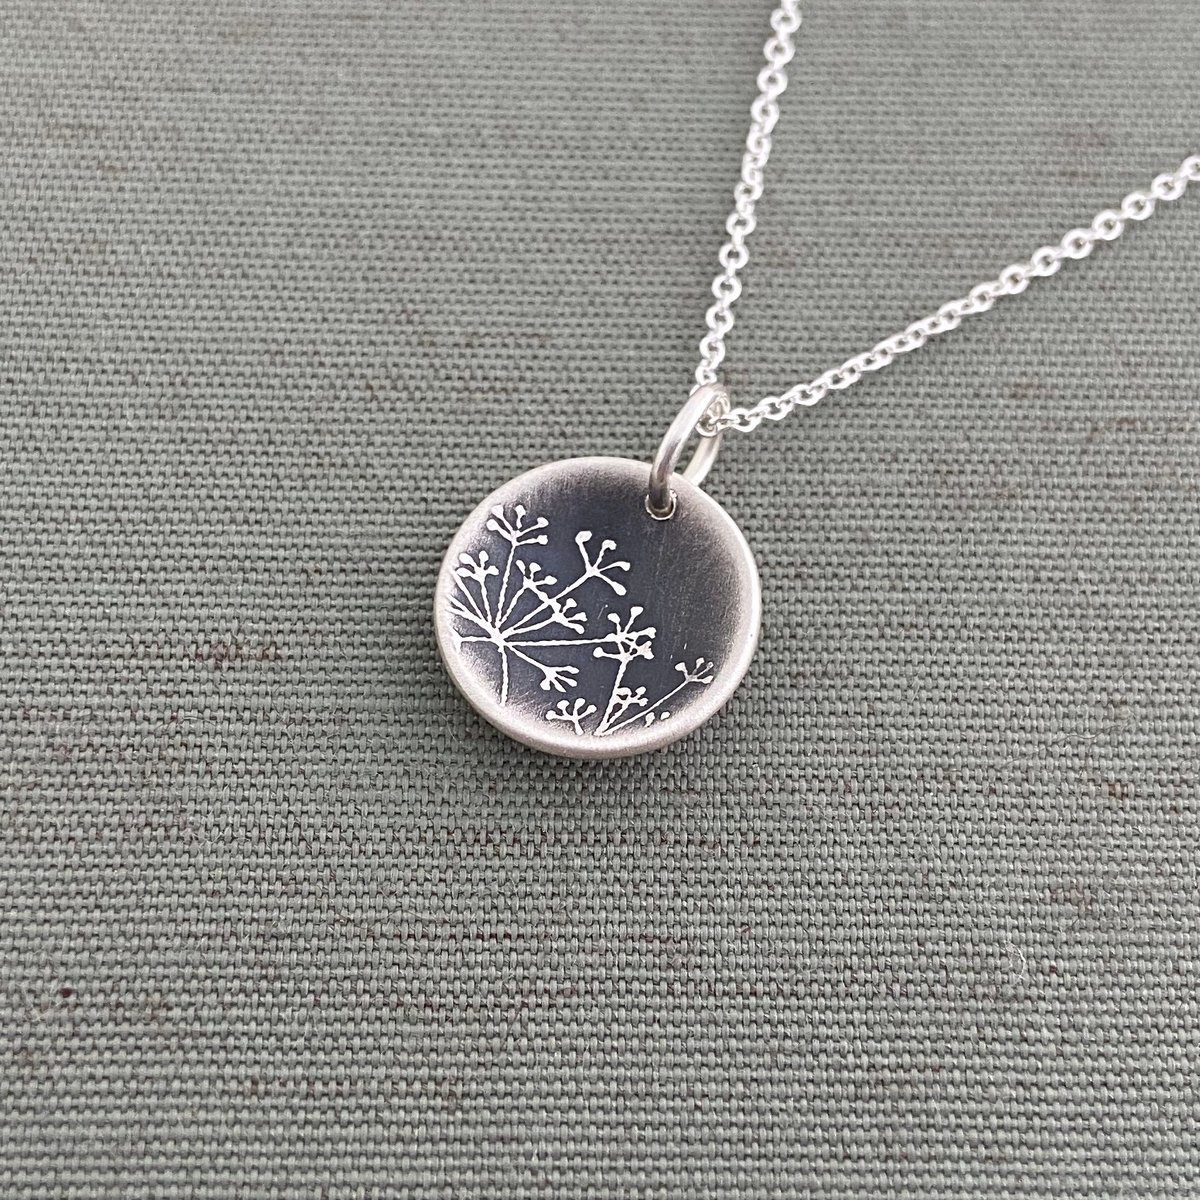 Tiny Cupped Queen Anne's Lace Necklace | Lisa Hopkins Design